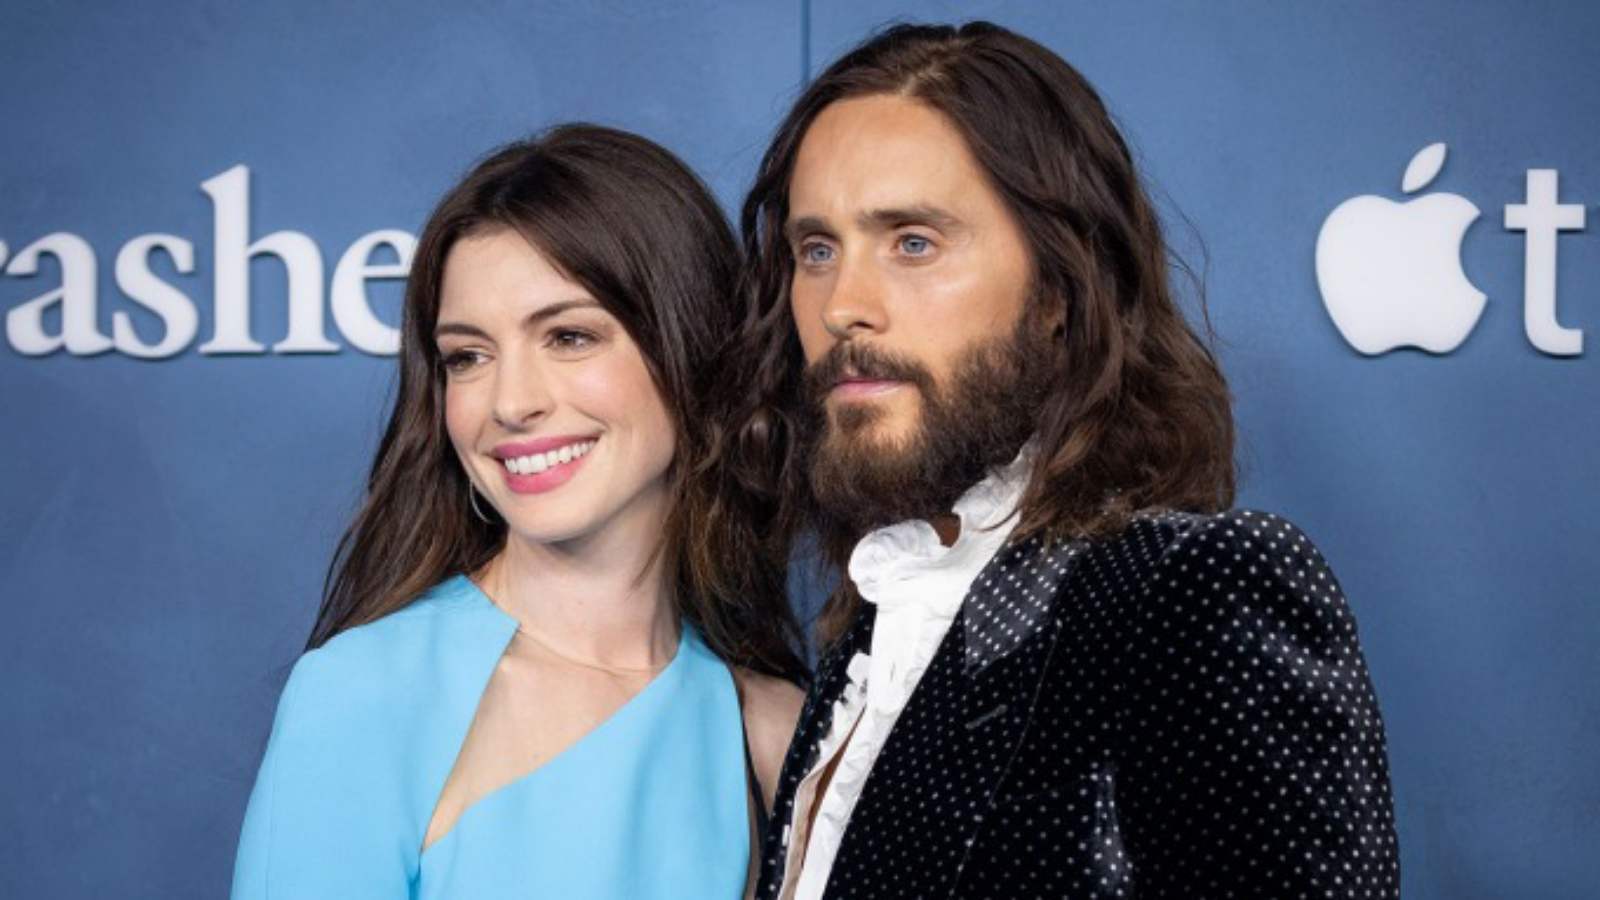 Anne Hathaway and Jared Leto at the red carpet premiere of their series